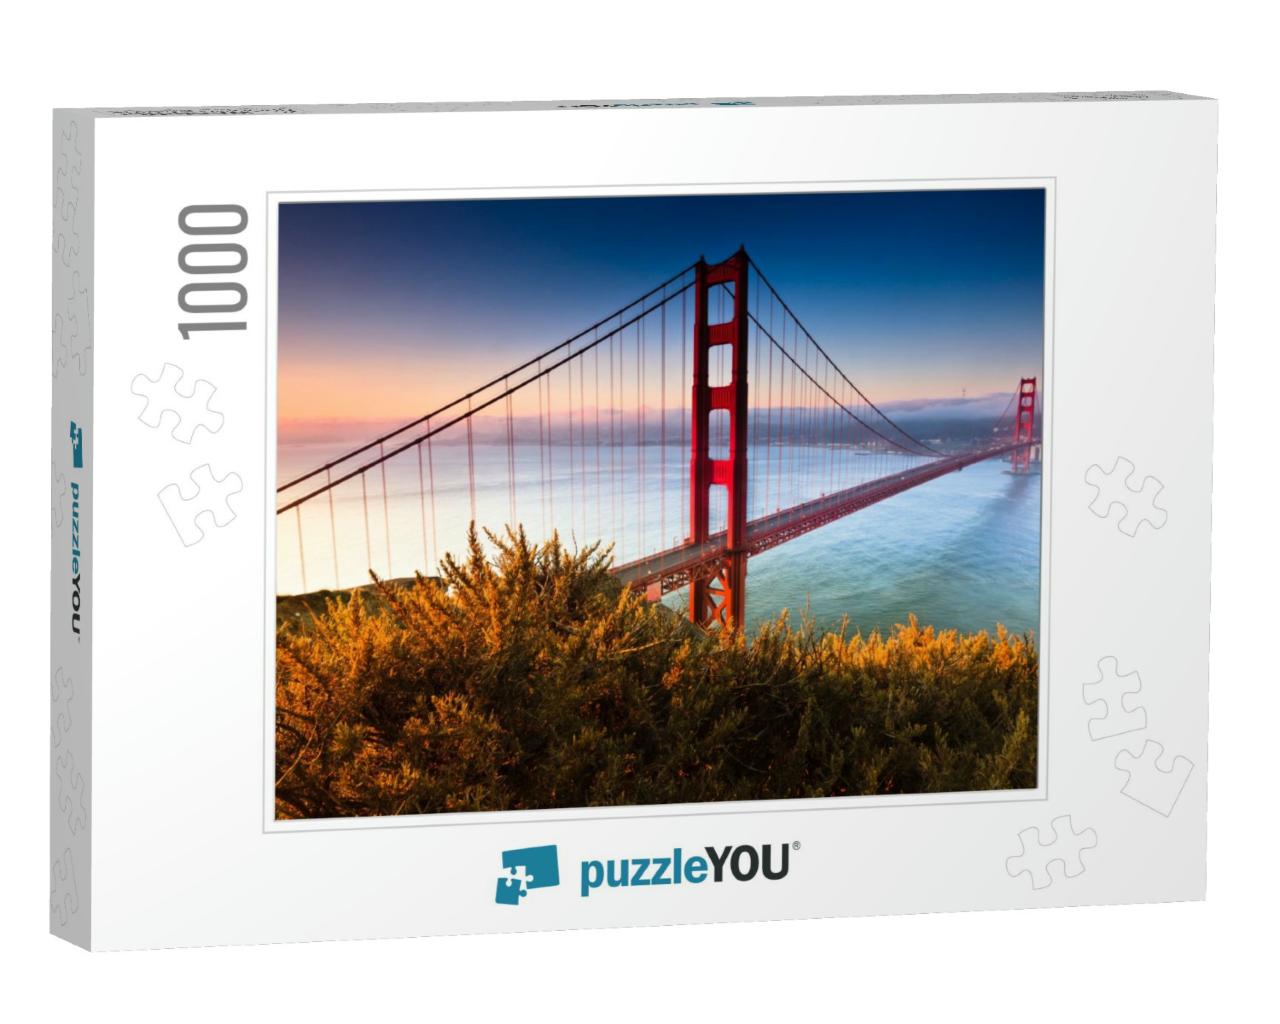 The Golden Gate Bridge of San Francisco, California Basks... Jigsaw Puzzle with 1000 pieces